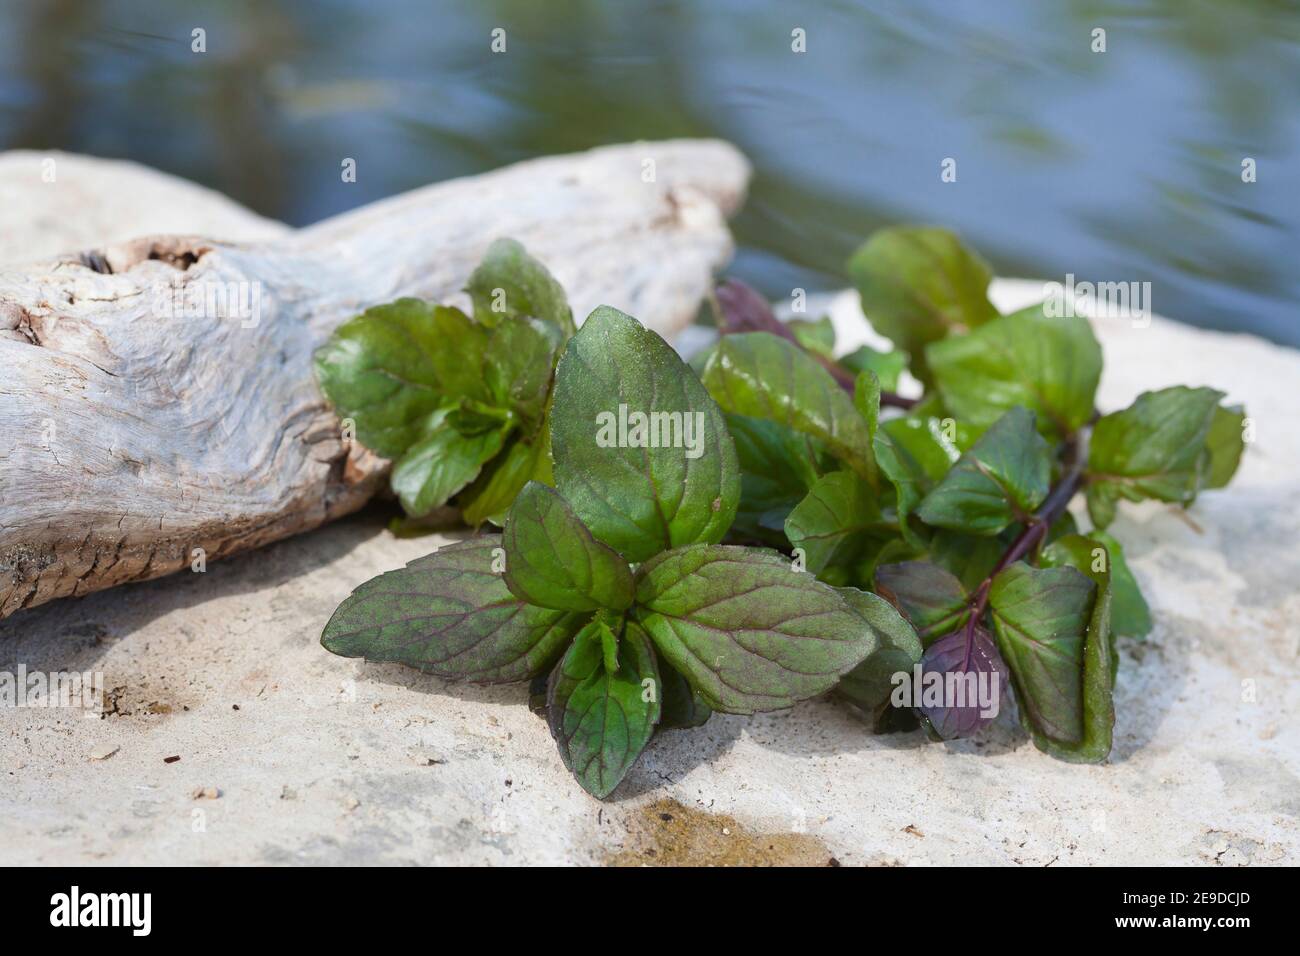 Wild water mint, Water mint, Horse mint (Mentha aquatica), picked water mint on a stone, Germany Stock Photo